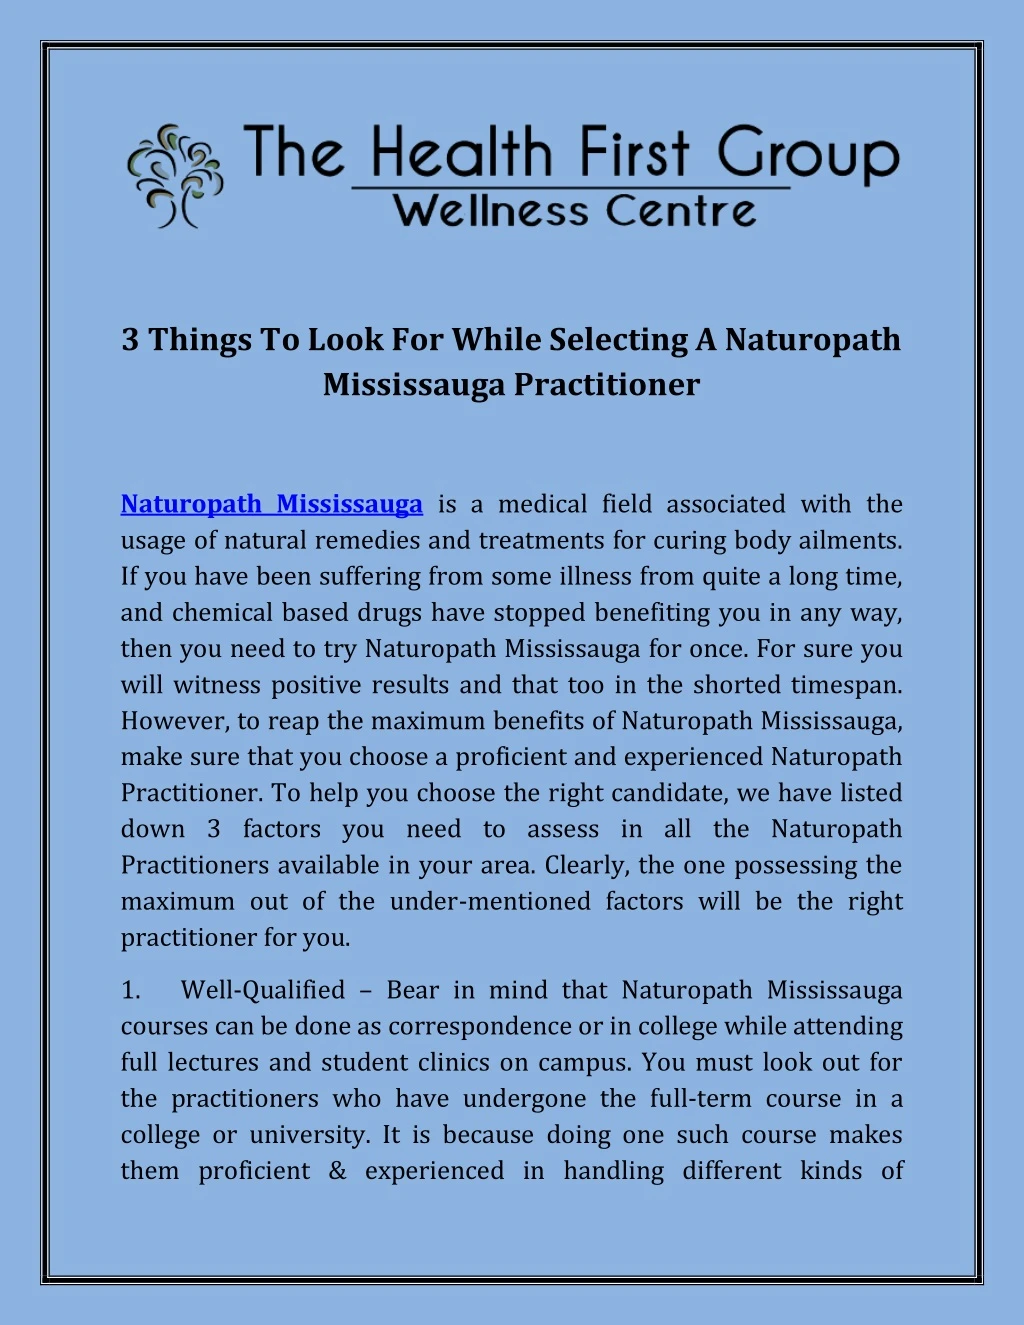 3 things to look for while selecting a naturopath